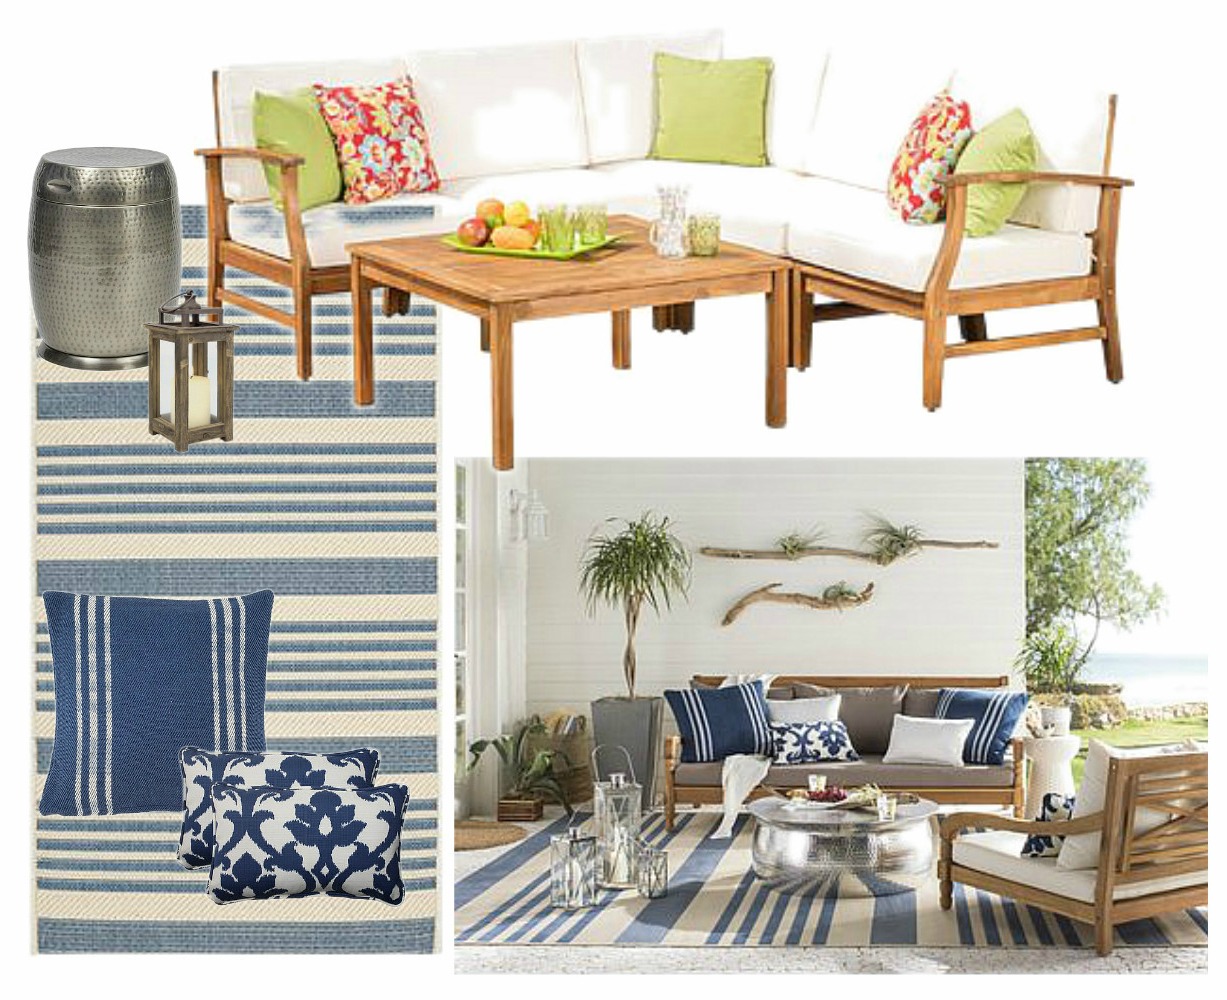 Blue and white rug, patio furniture.